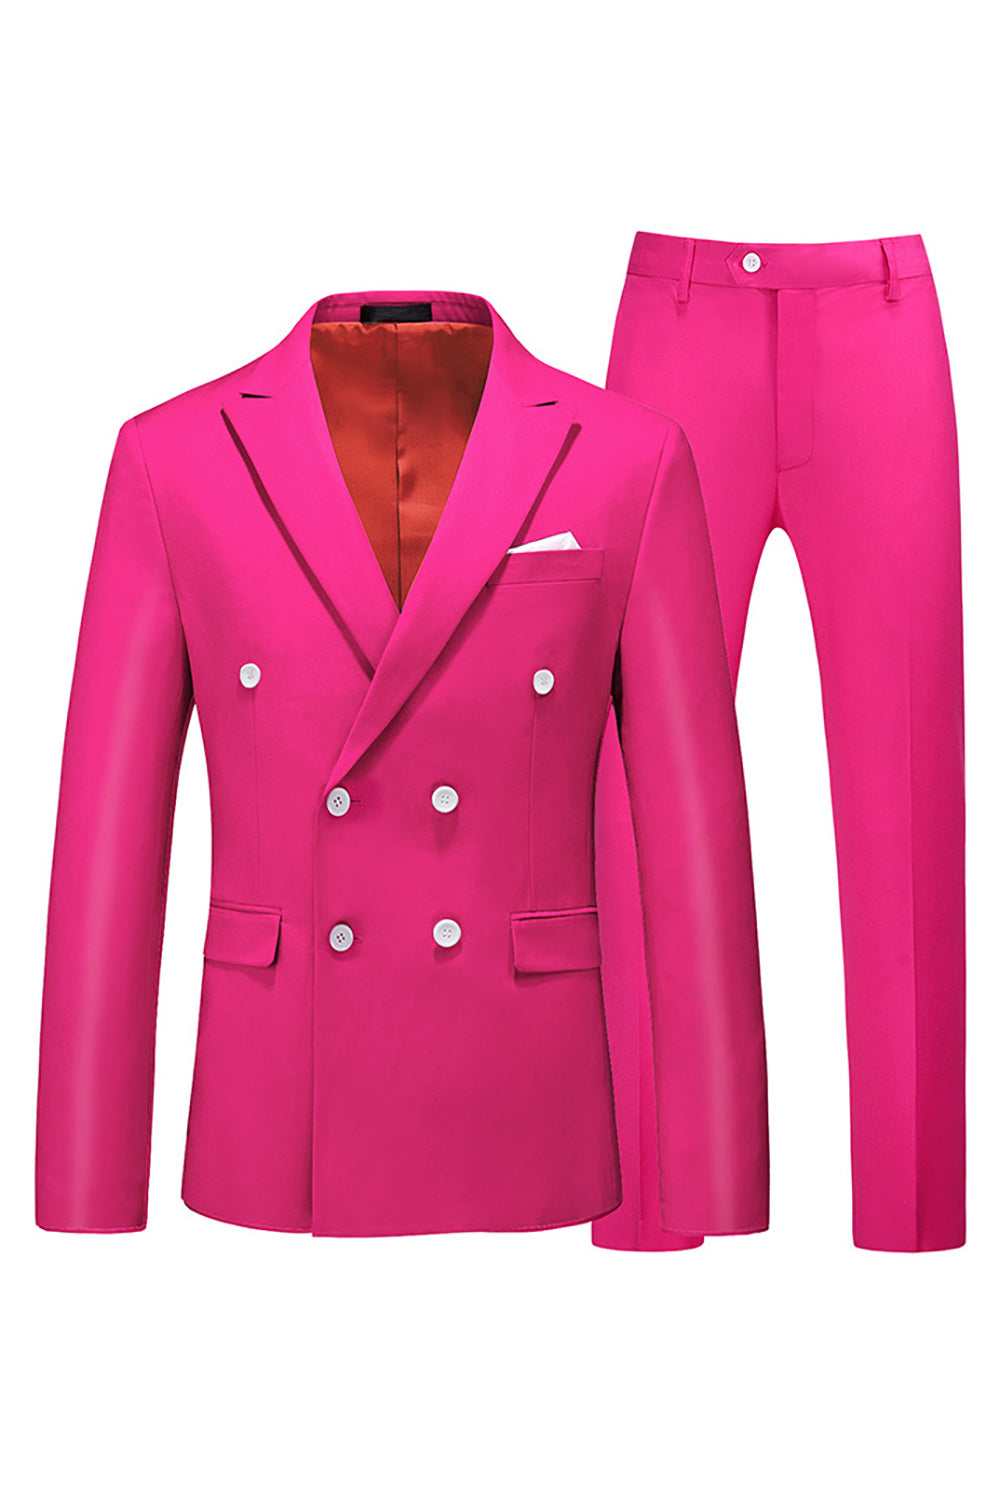 Hot Pink Double Breasted 2 Piece Prom Mænd Dragter